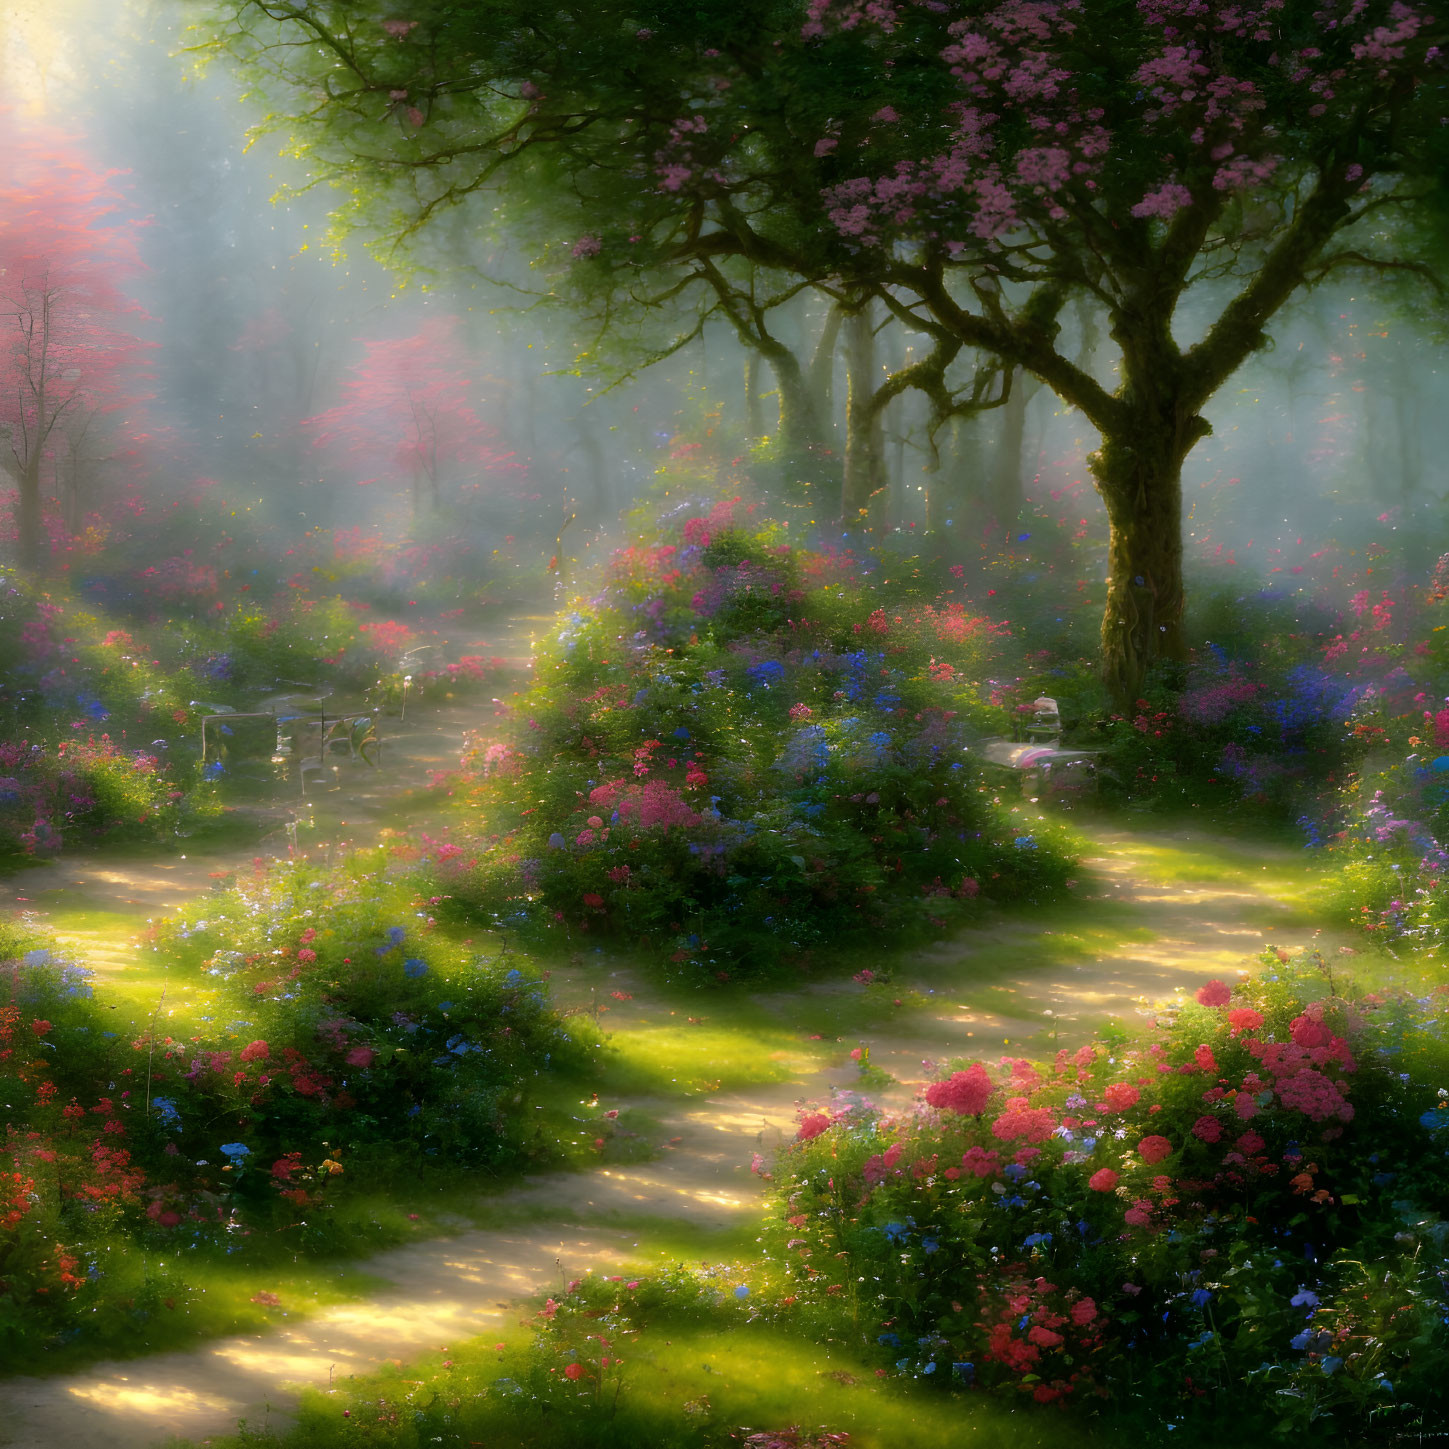 Forest path with vibrant flowers under sunlight and misty ambiance